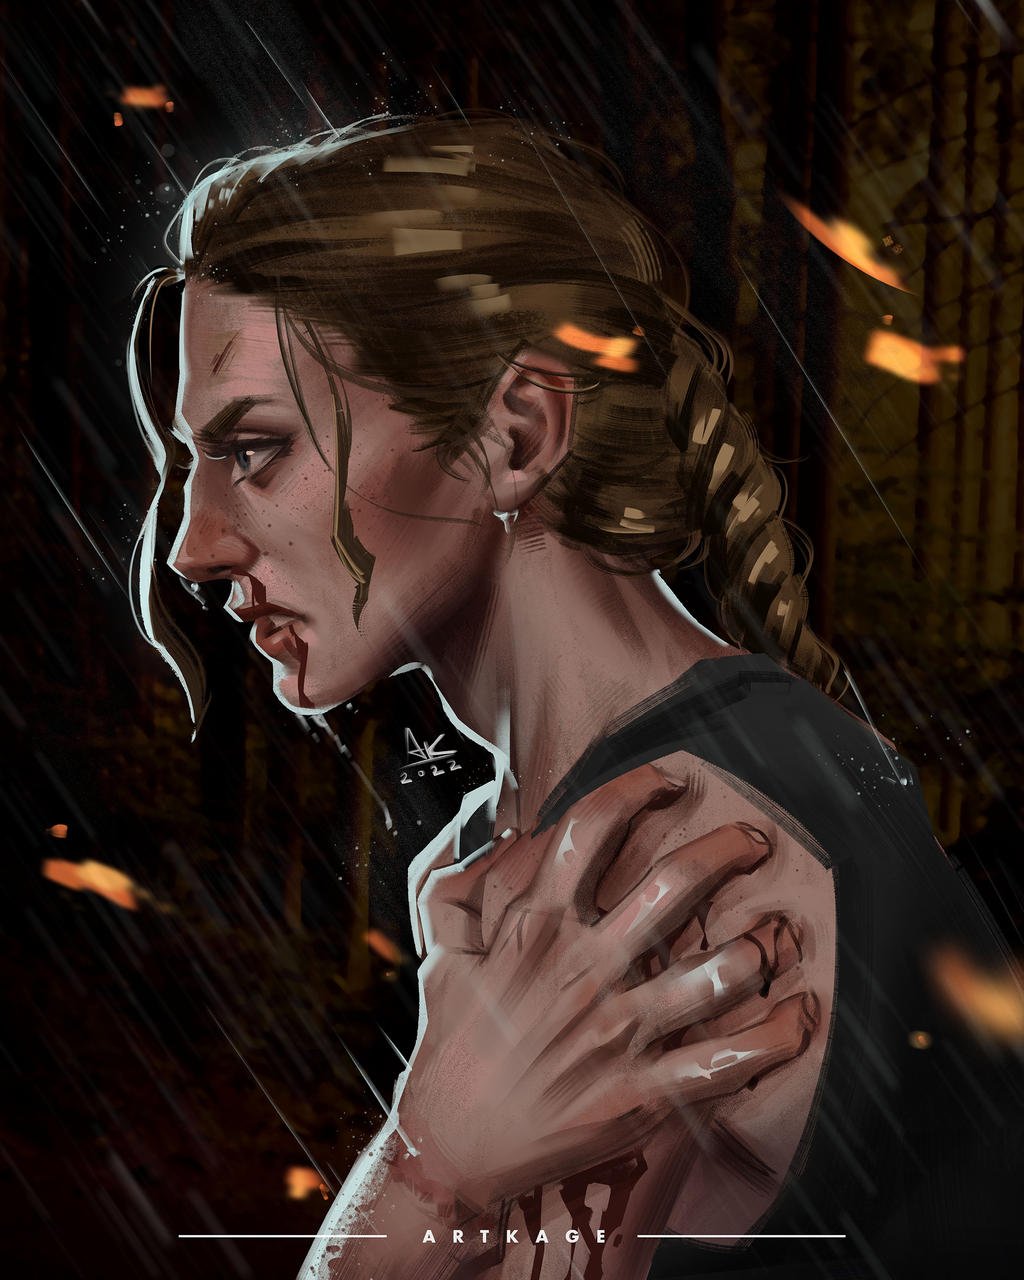 Abby Transformation In The Last of Us 2 by mikelshehata on DeviantArt